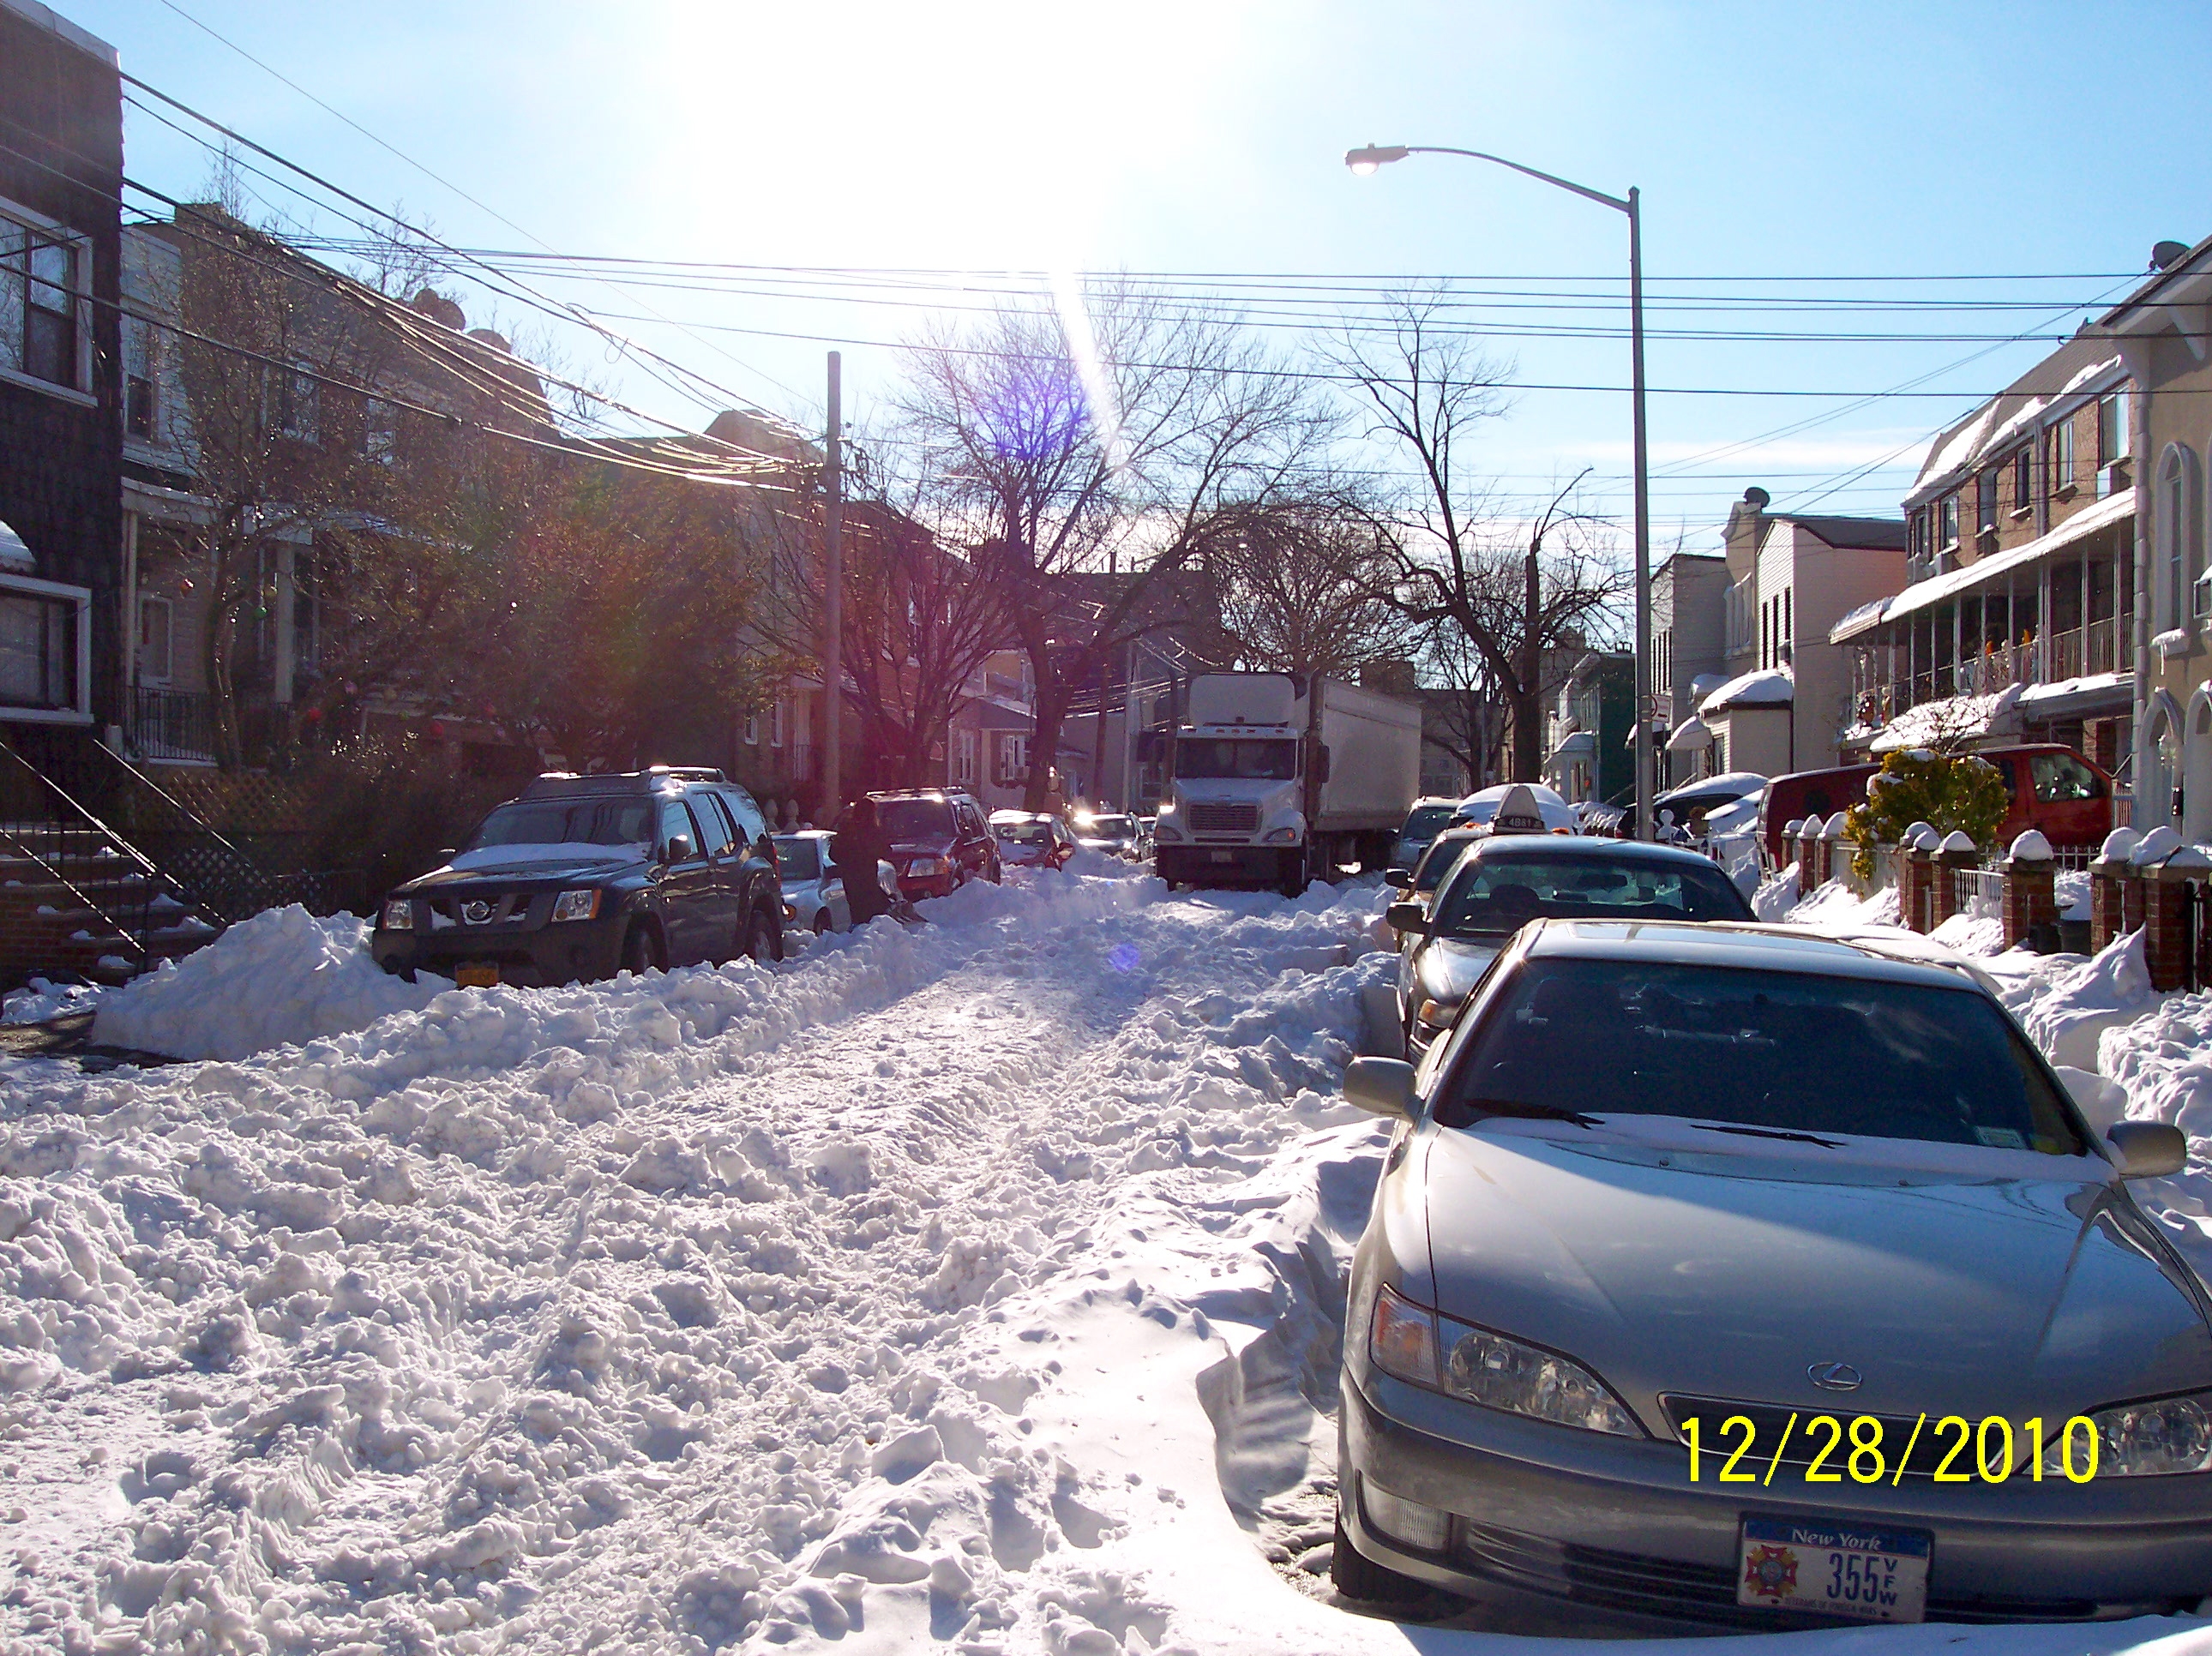 1-snow-astoria-on-23rd-ave-and-37th-st-ricky-criswell.jpg 